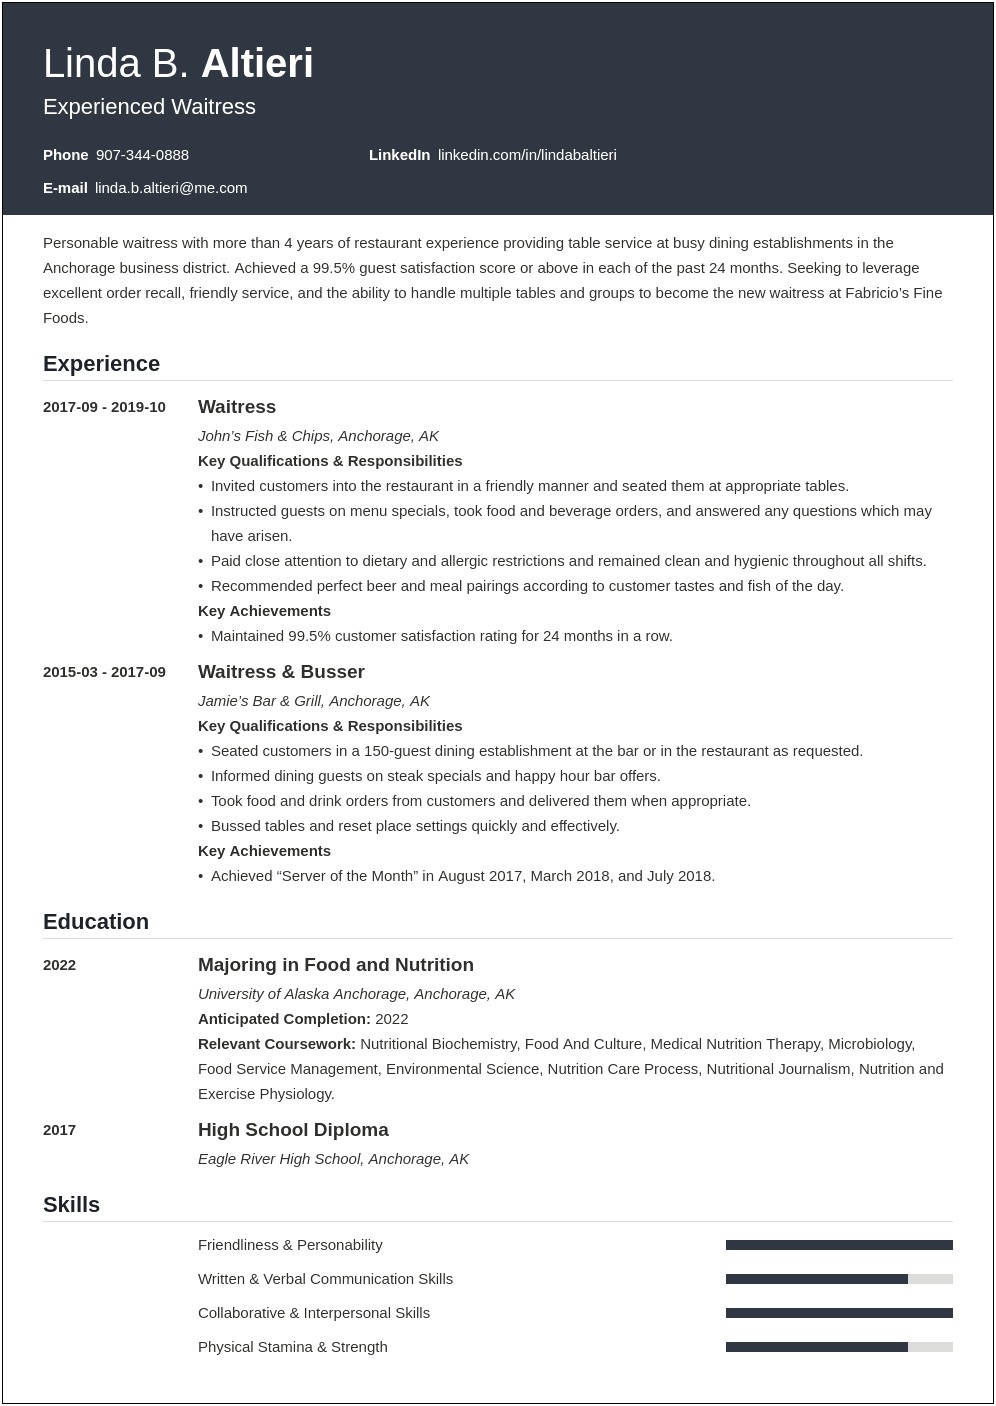 Resume Work Experience Examples For Waitress